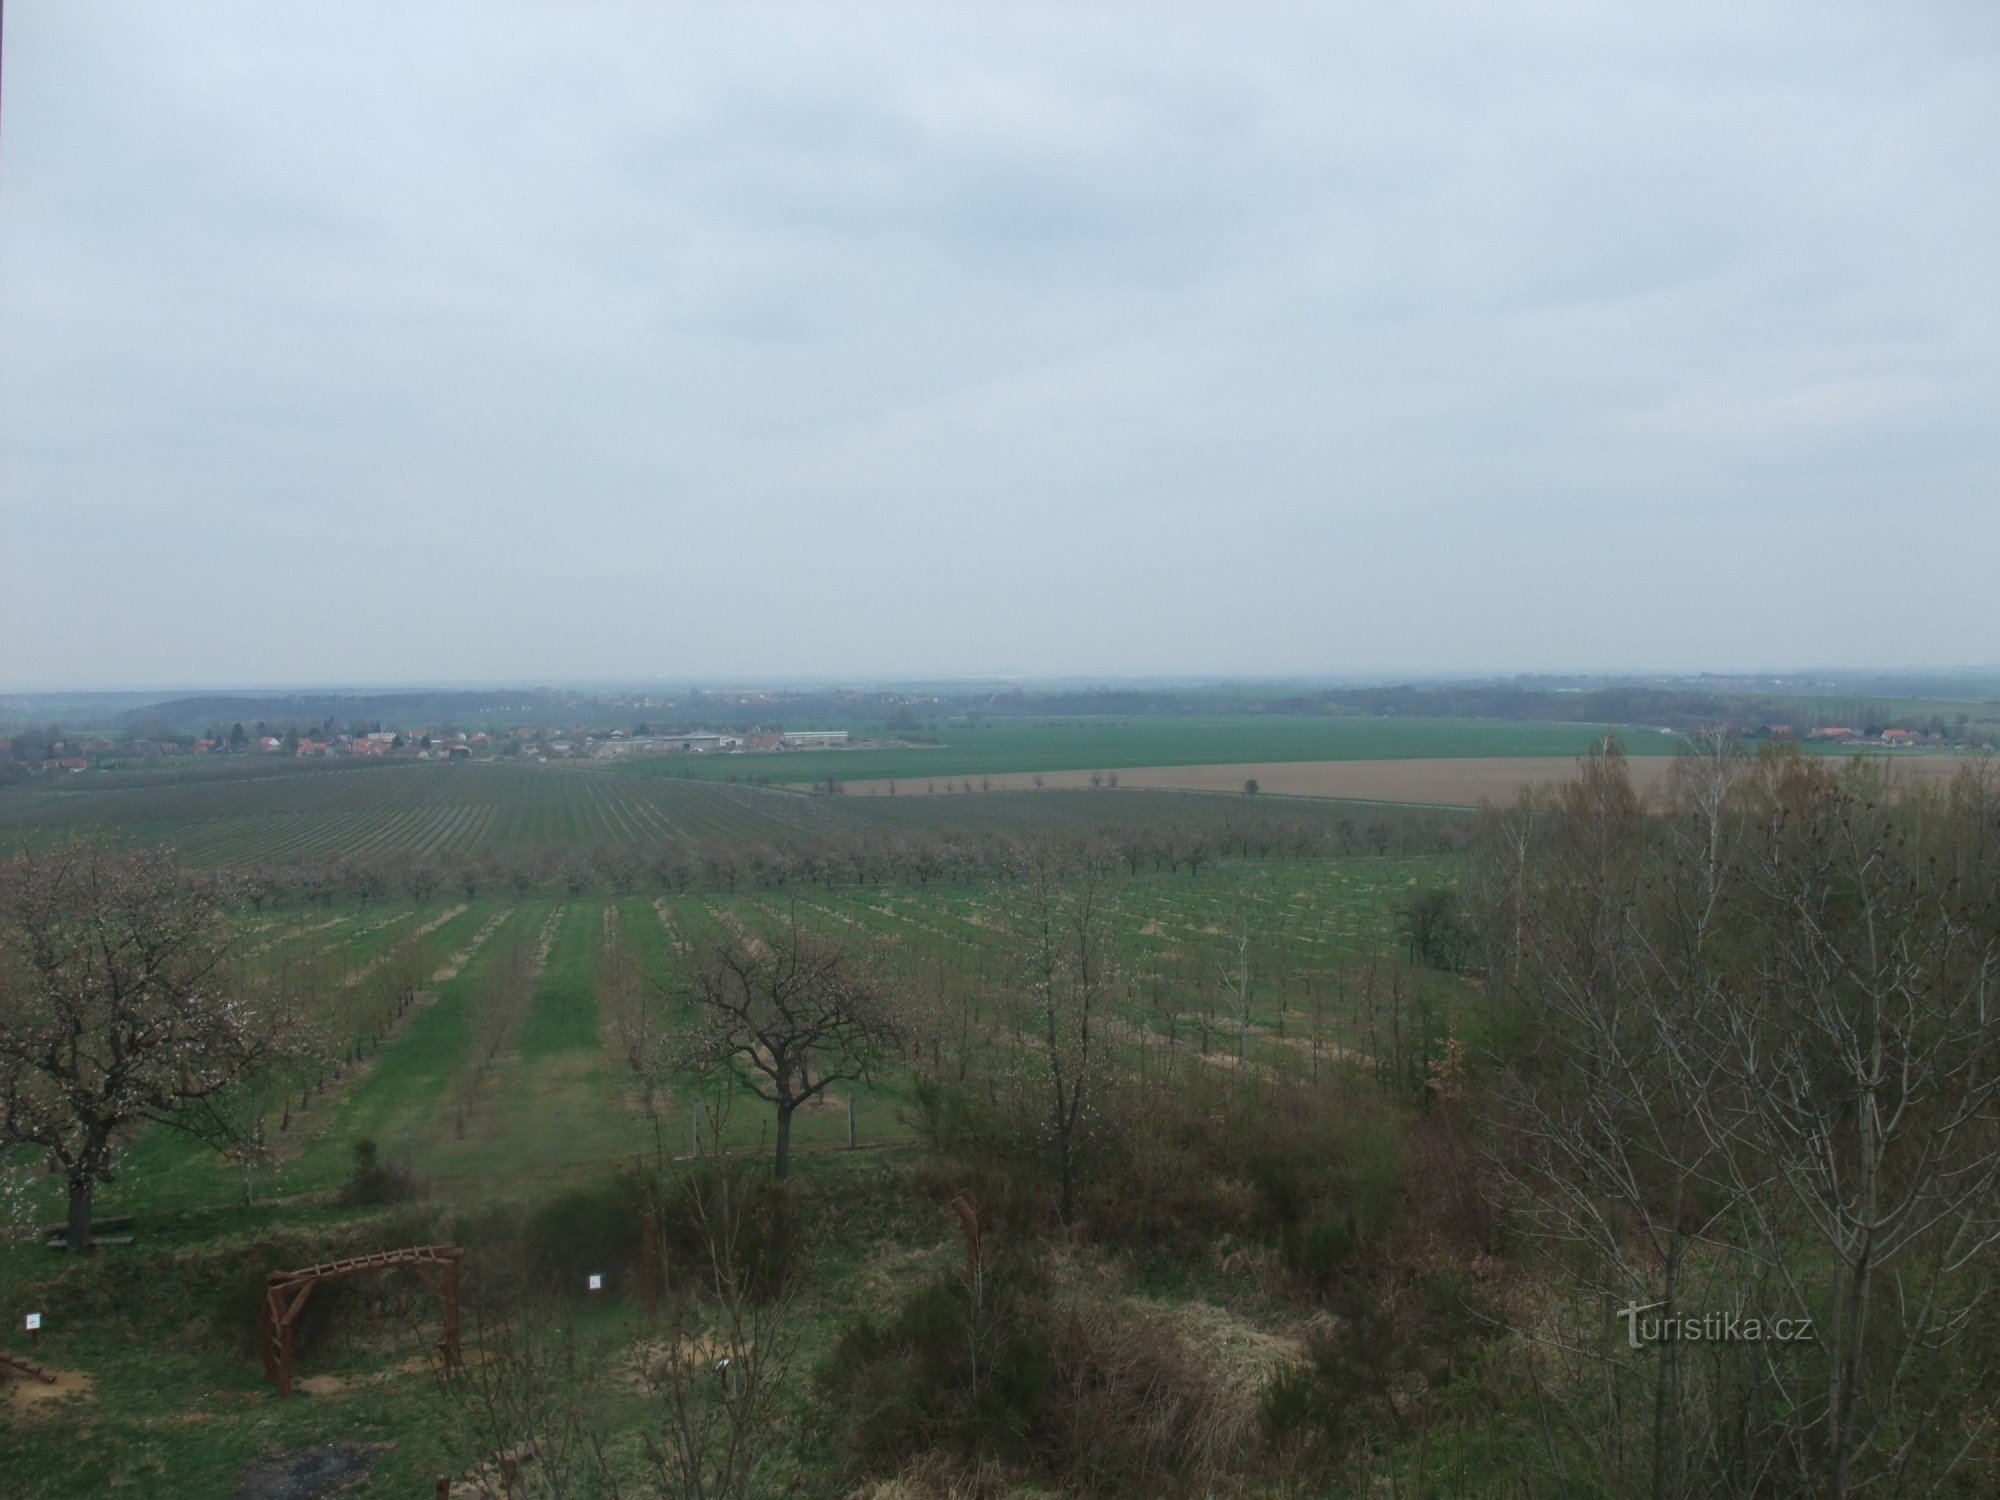 The view from the Barborka observation tower